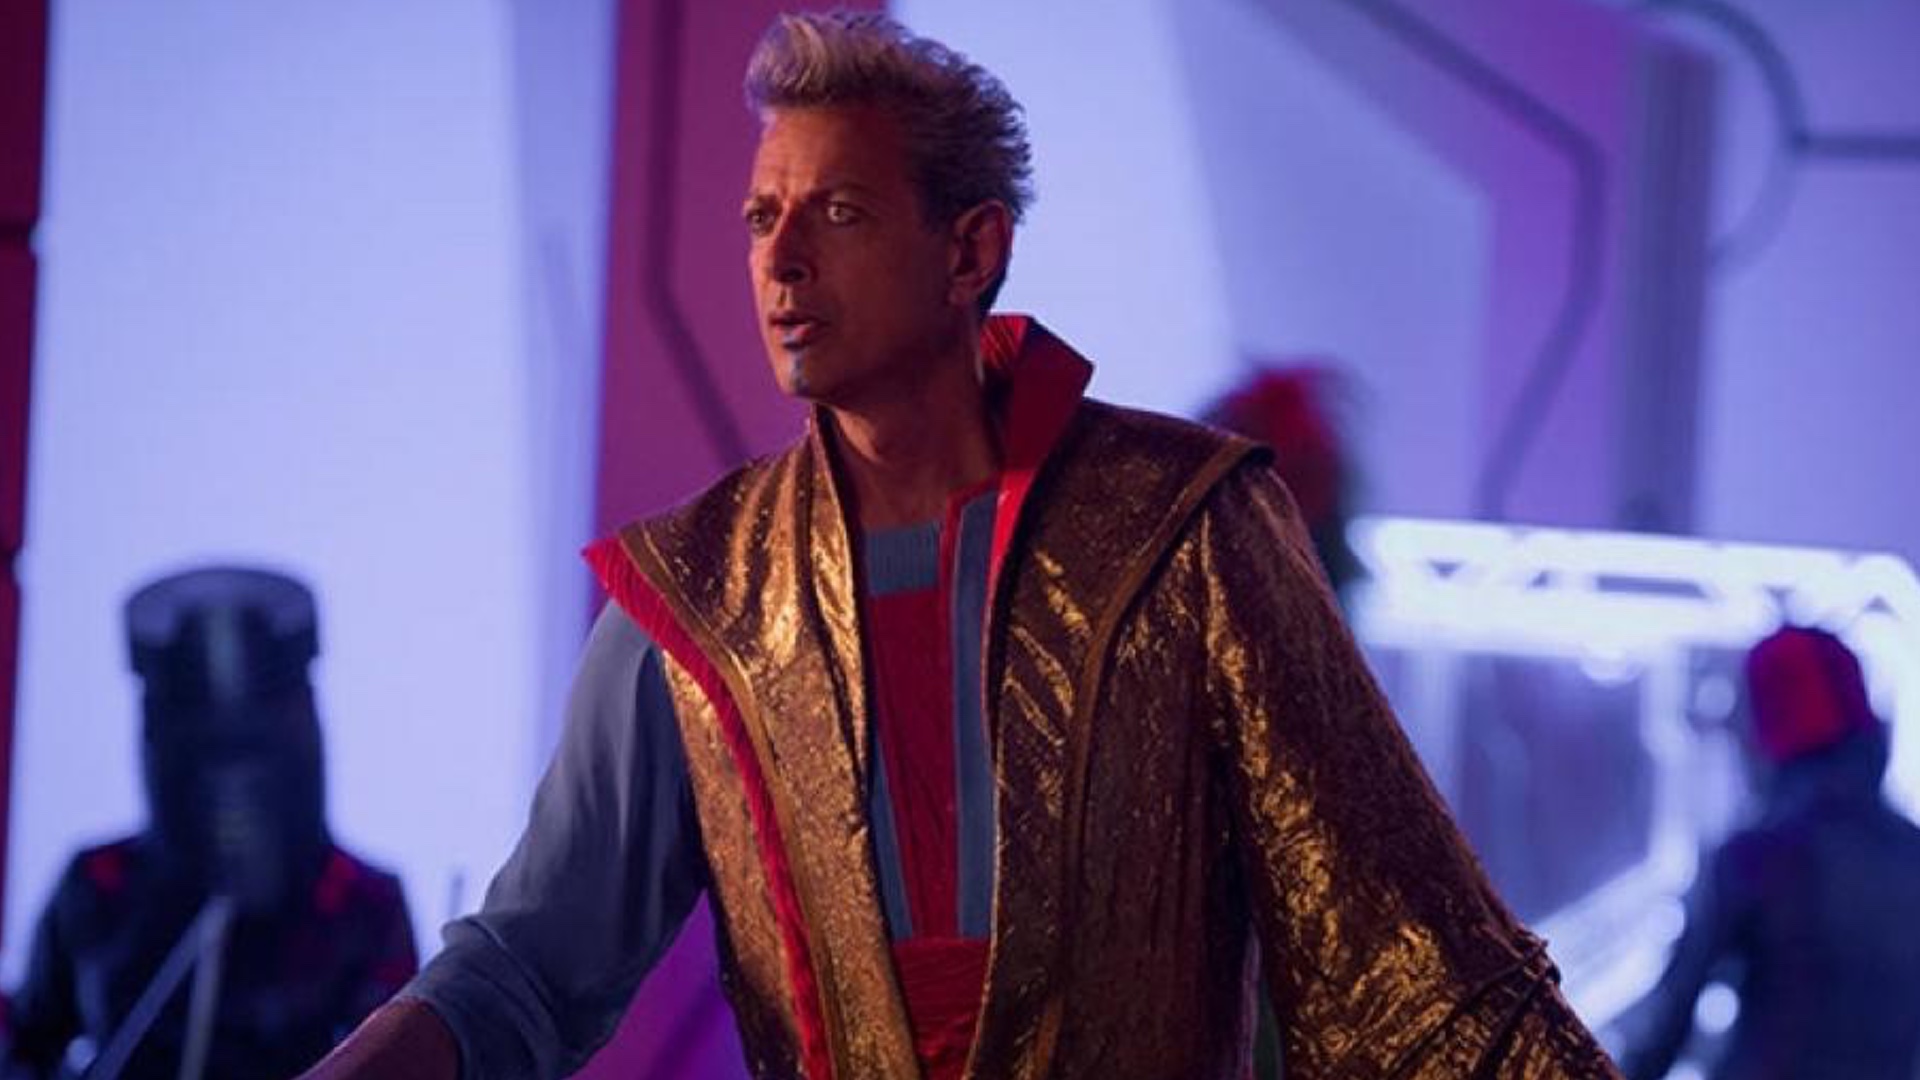 The Grandmaster Starts a New Life on Earth with Thor's old Roommate Darryl  in Upcoming Marvel Short — GeekTyrant